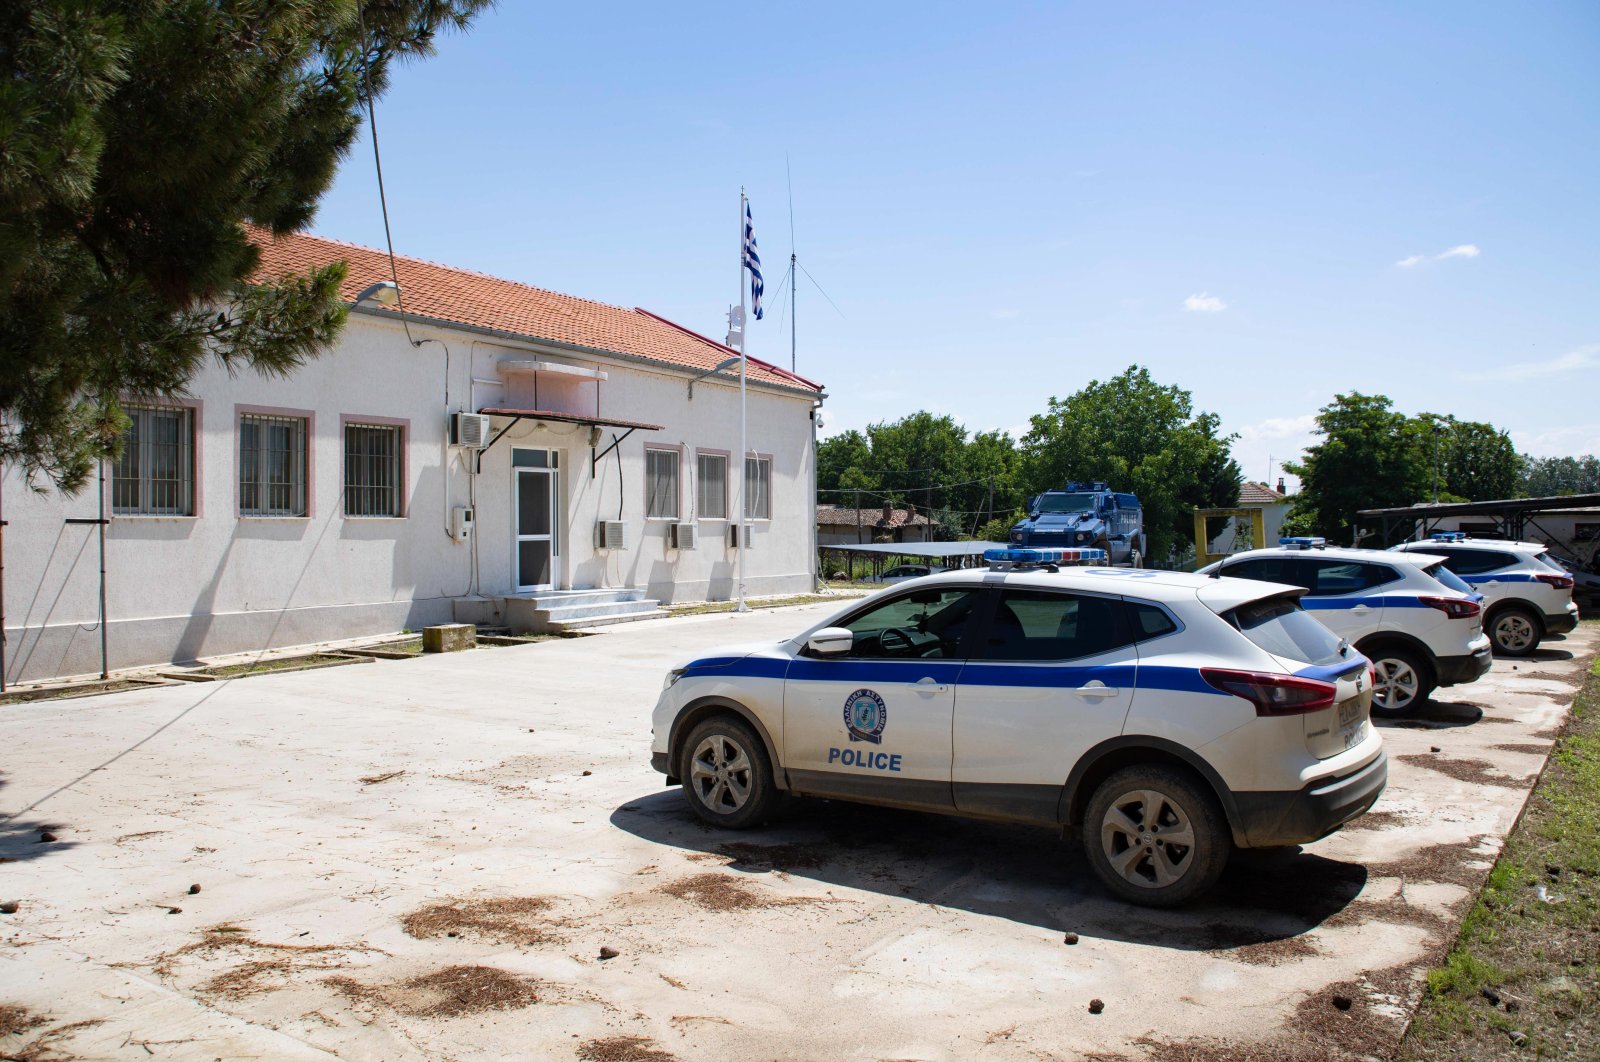 Border police station with vehicles in Nea Vyssa, Evros Region, Greece on June 18, 2021 (REUTERS Photo)